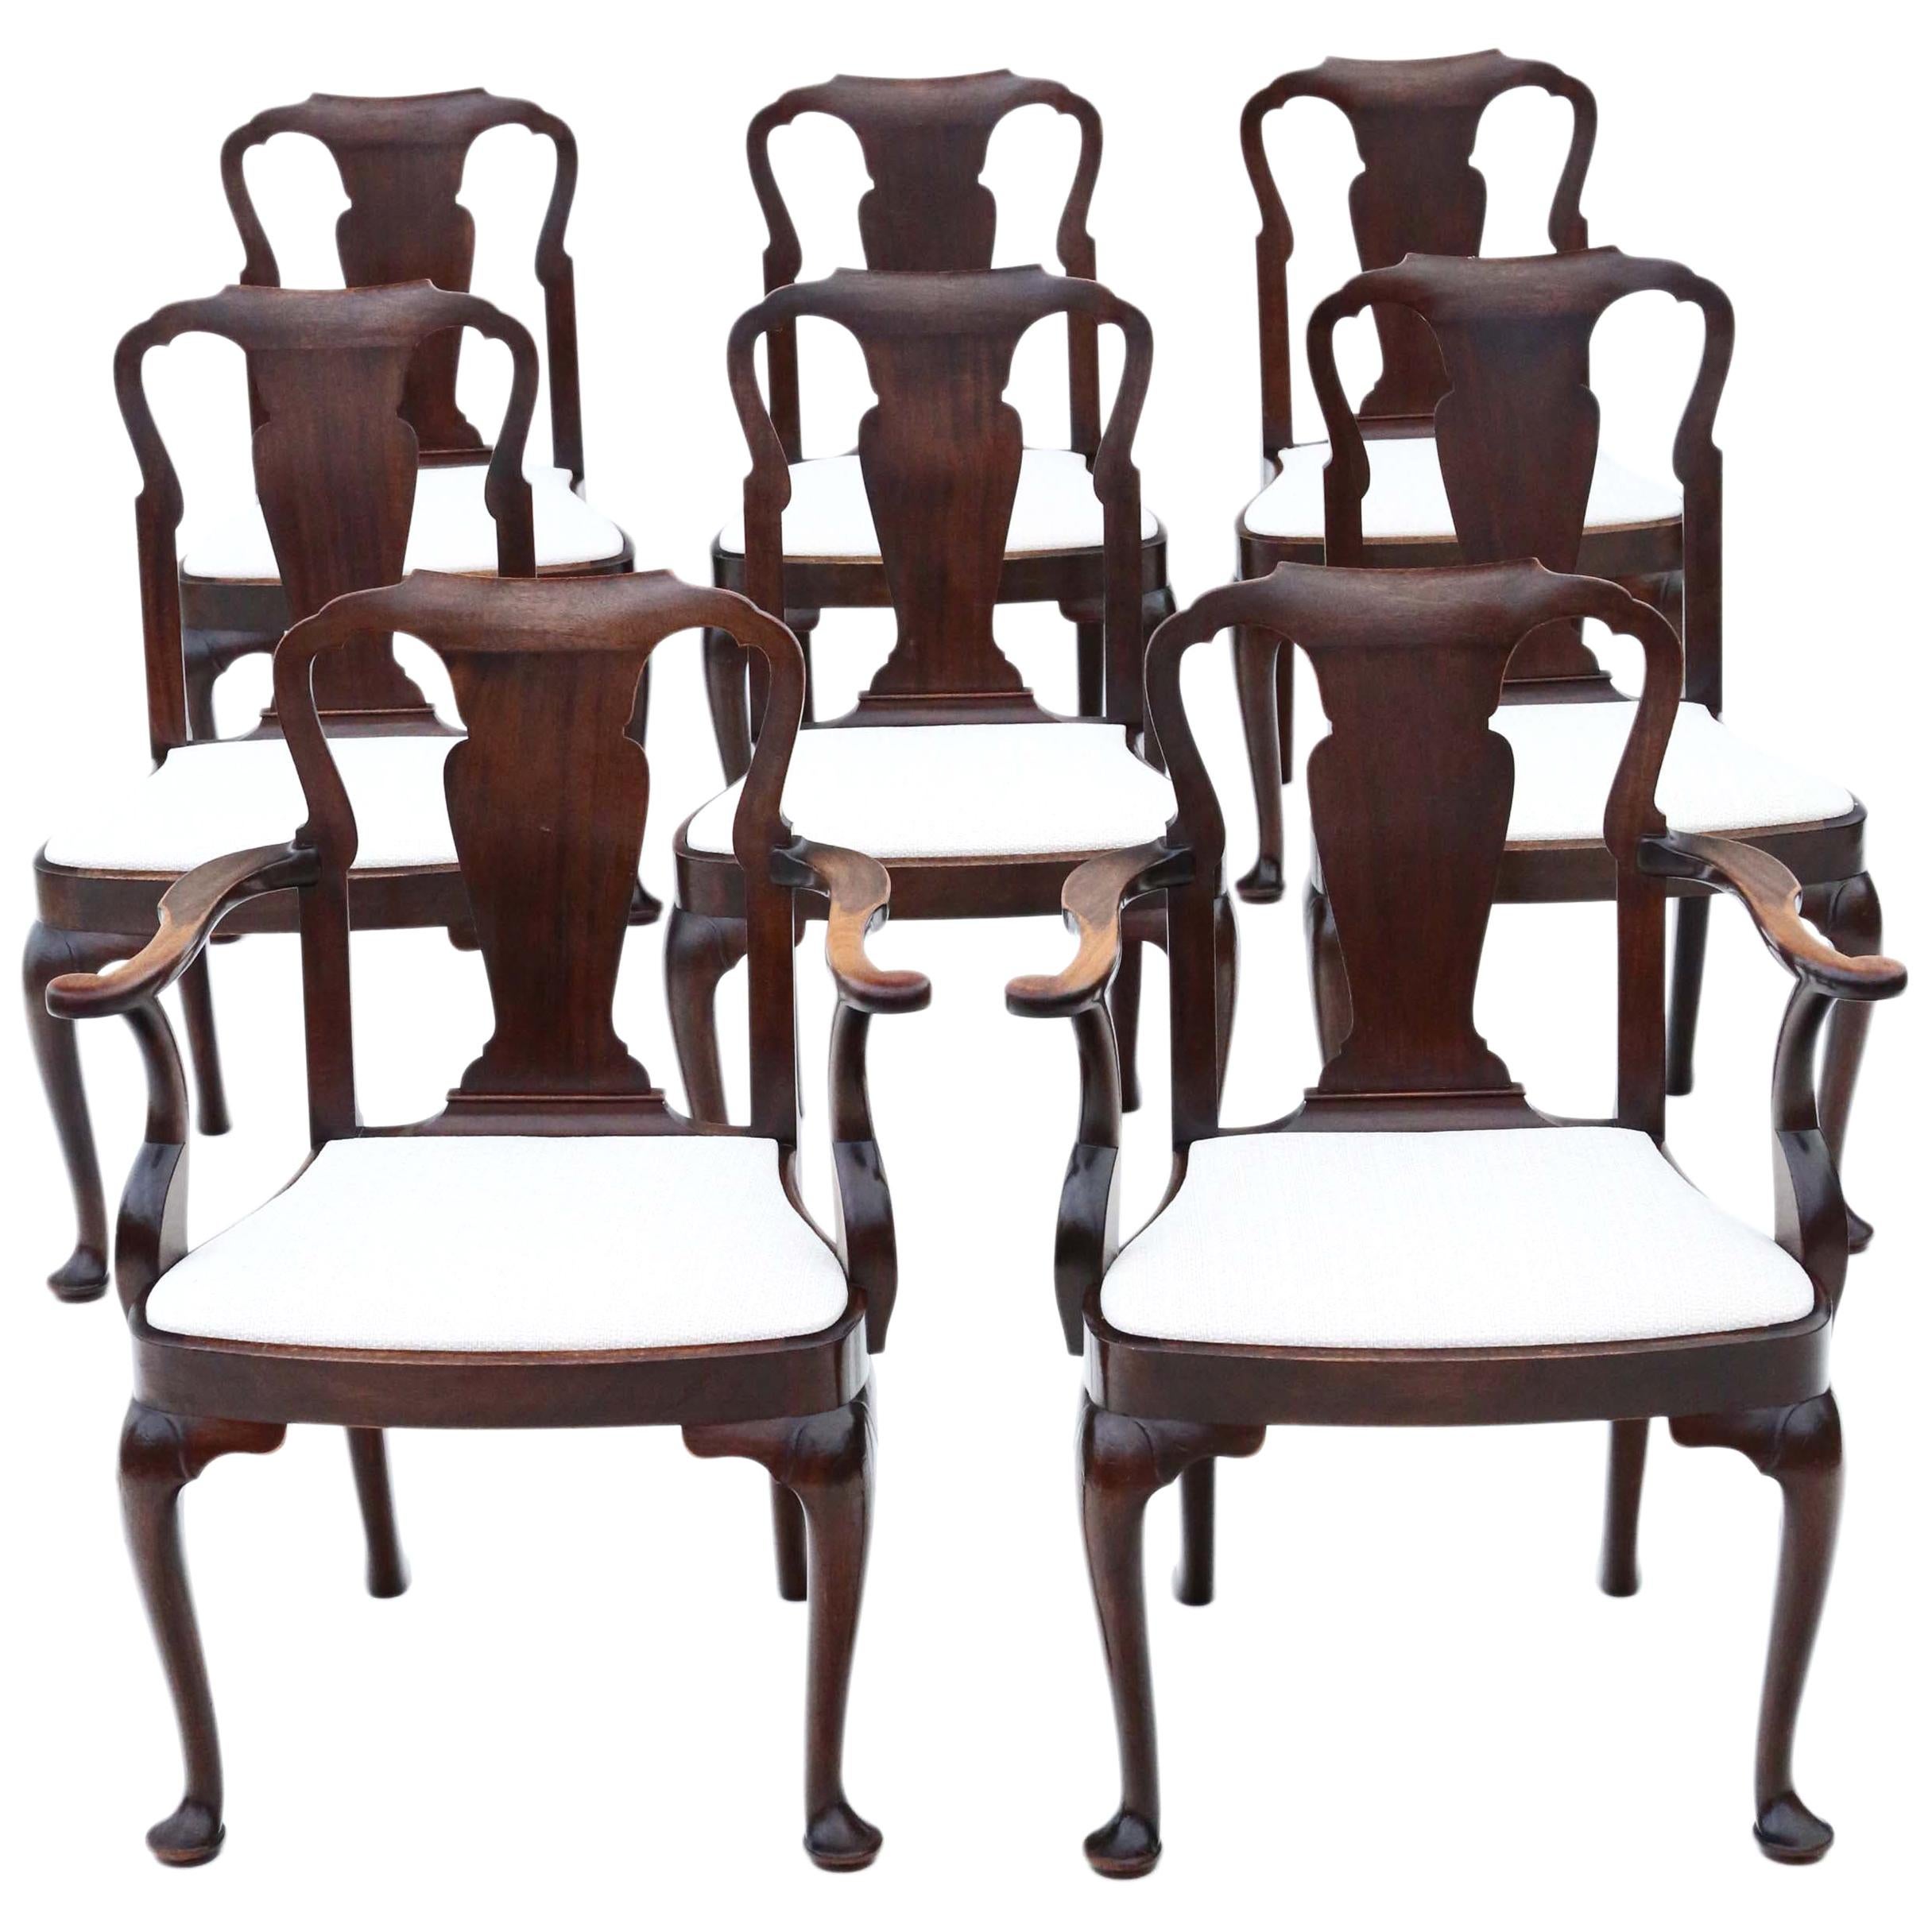 Antique Set of 8 '6+2' Mahogany Dining Chairs Queen Anne Revival